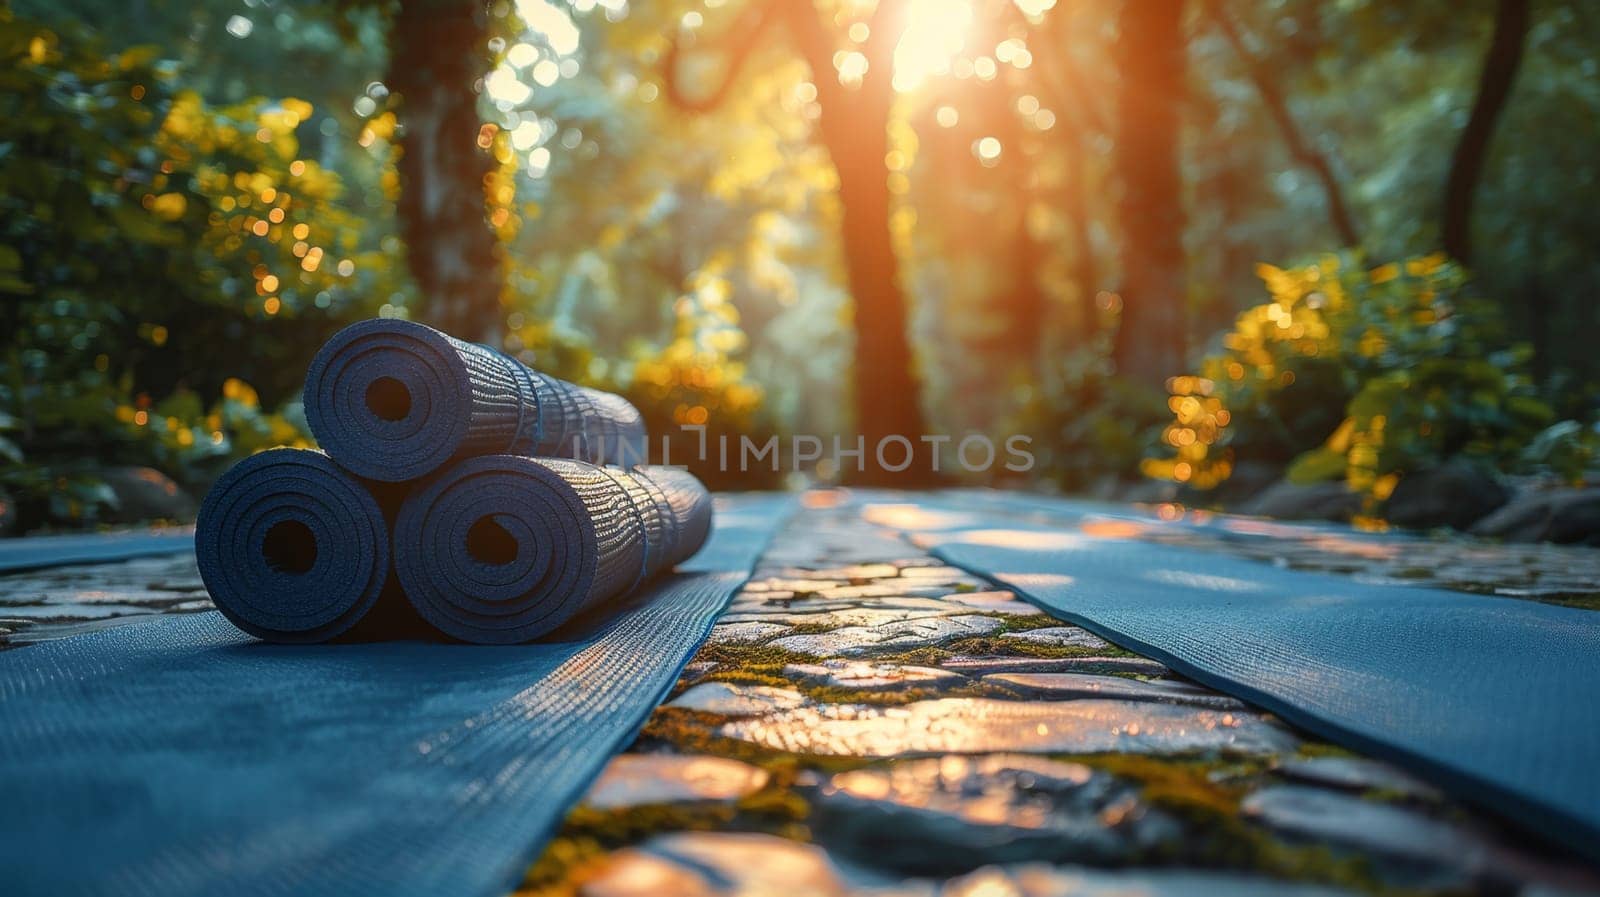 There is a set of yoga mats on the wooden floor in the room. International Yoga Day by Lobachad